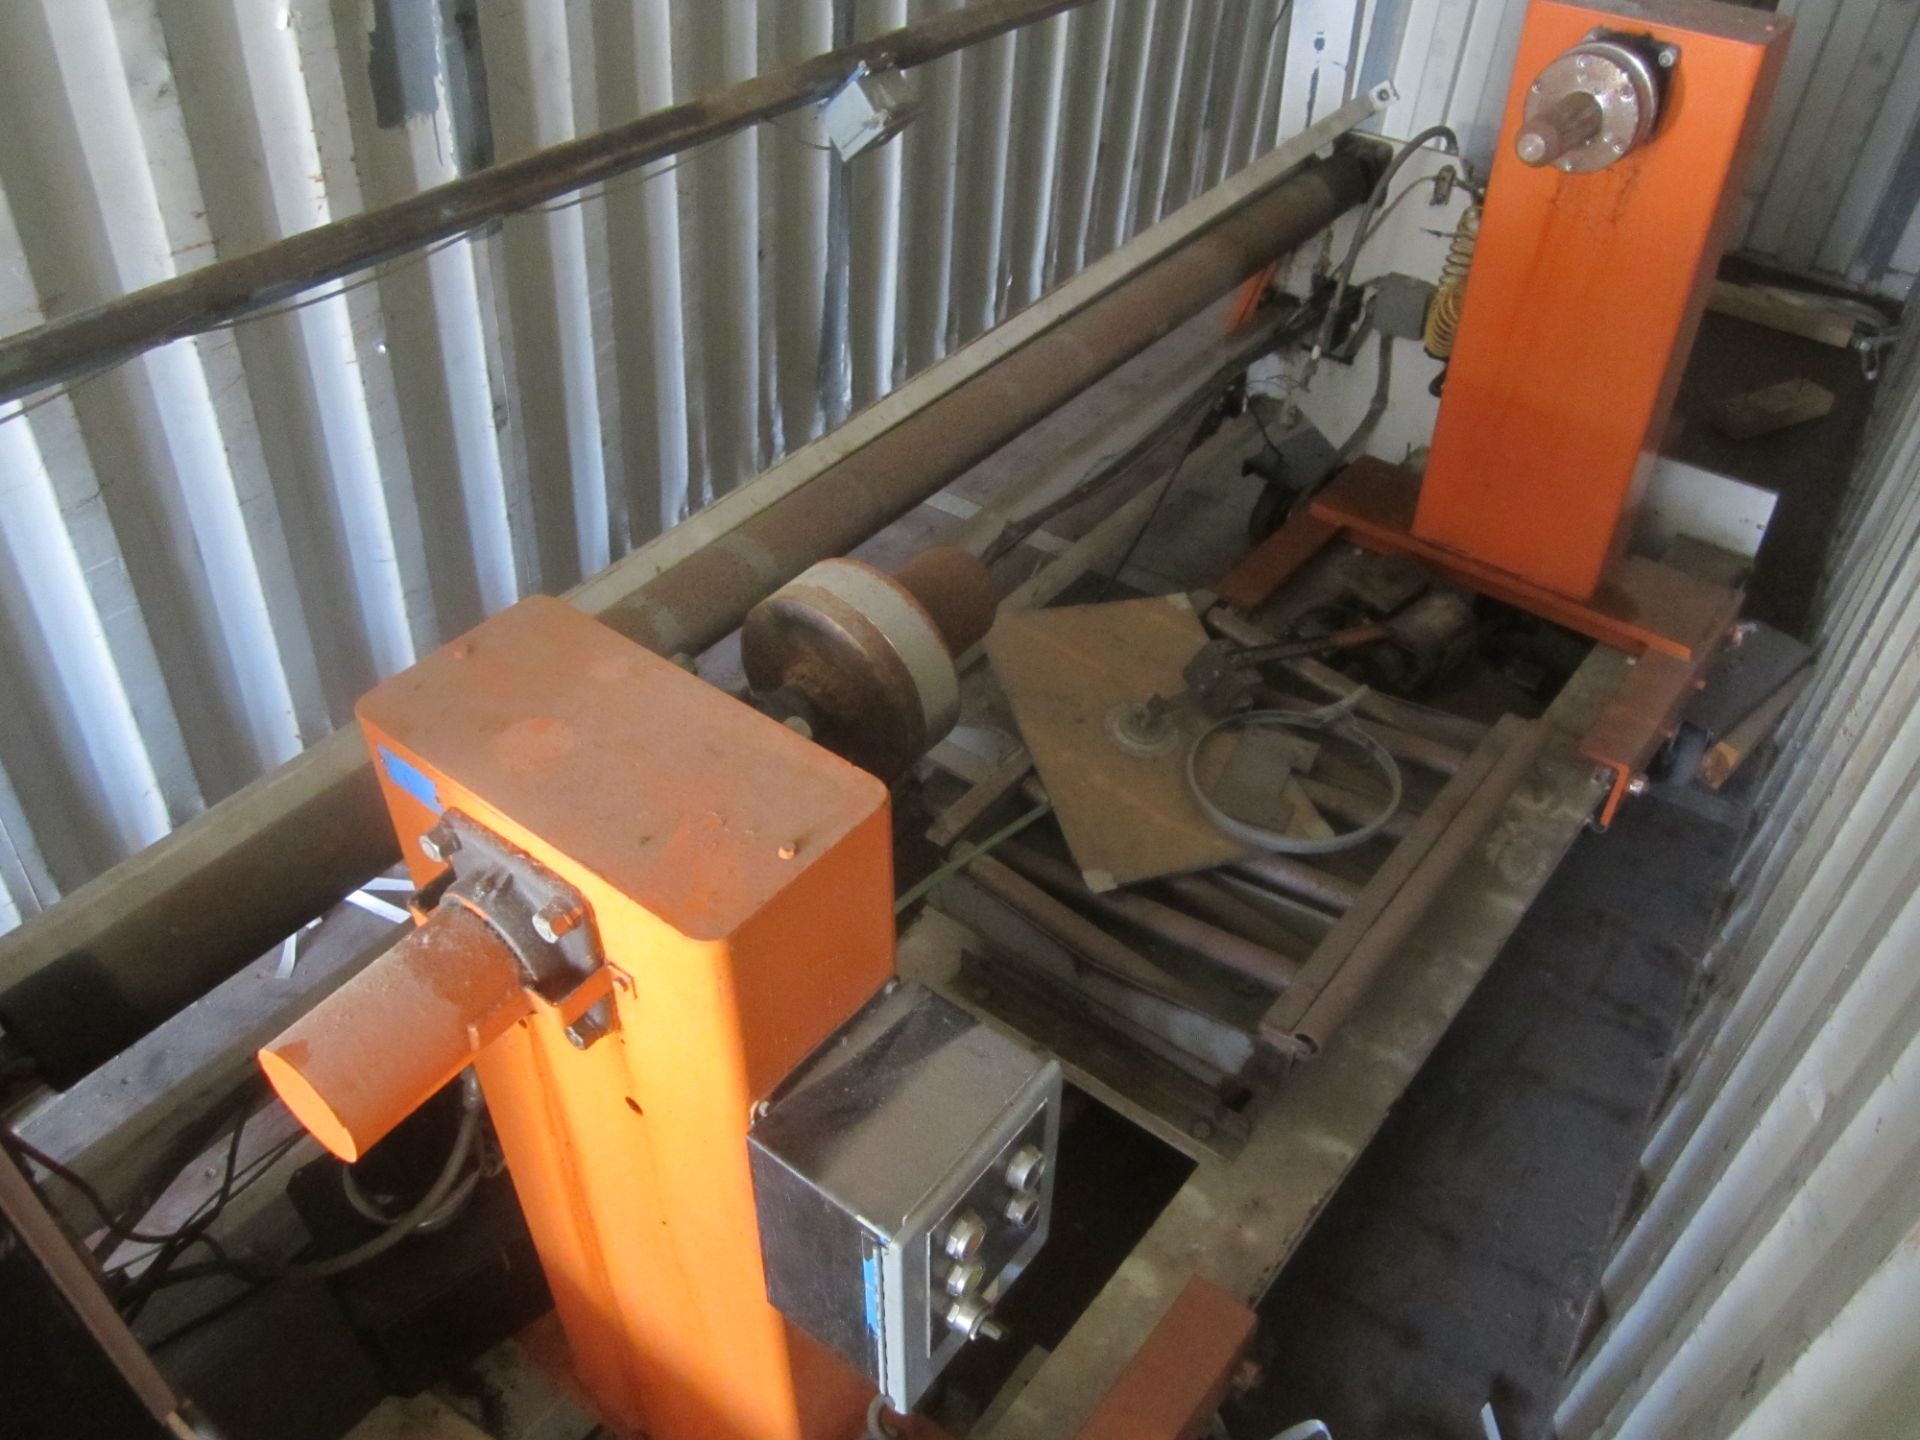 Core Wide Cutting Machine, 96" Max. Width, Hydraulic Clamp/Unclamp, Electric Foot Pedal - Image 2 of 9